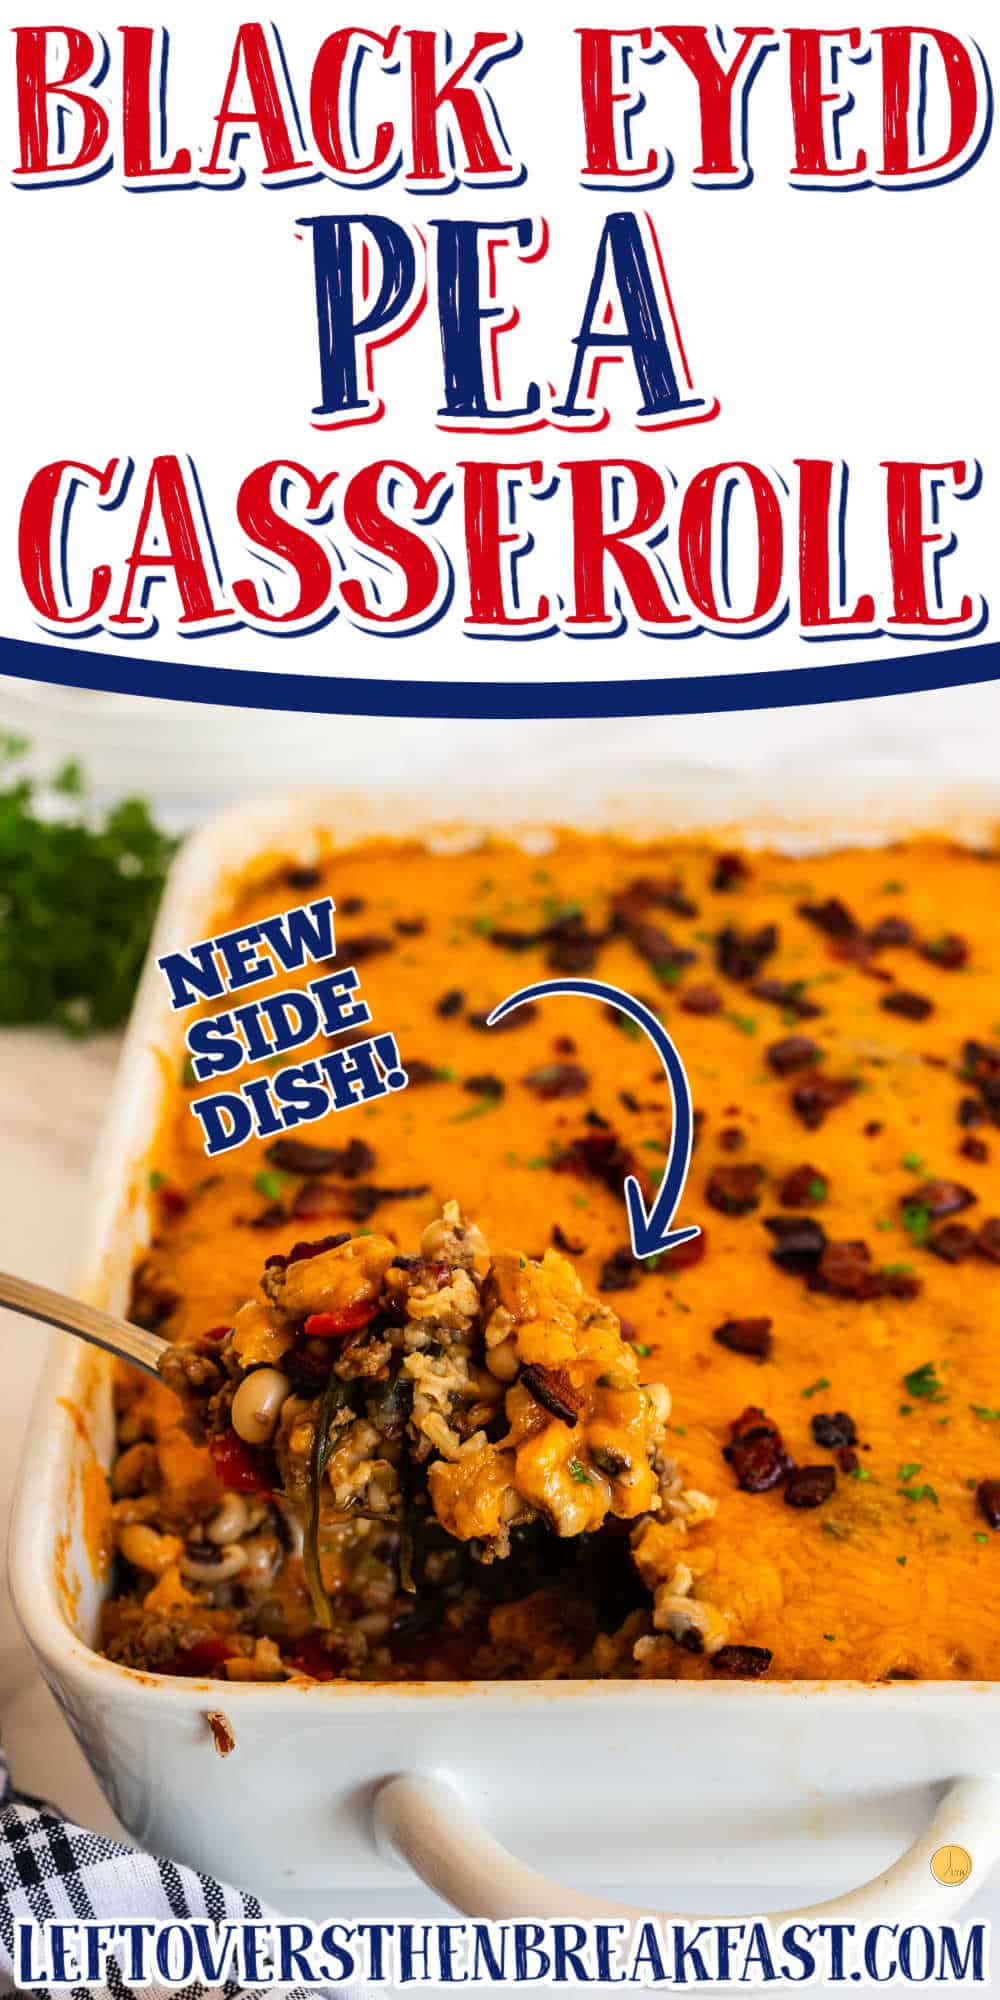 spoon of black eyed pea casserole with test "new side dish"